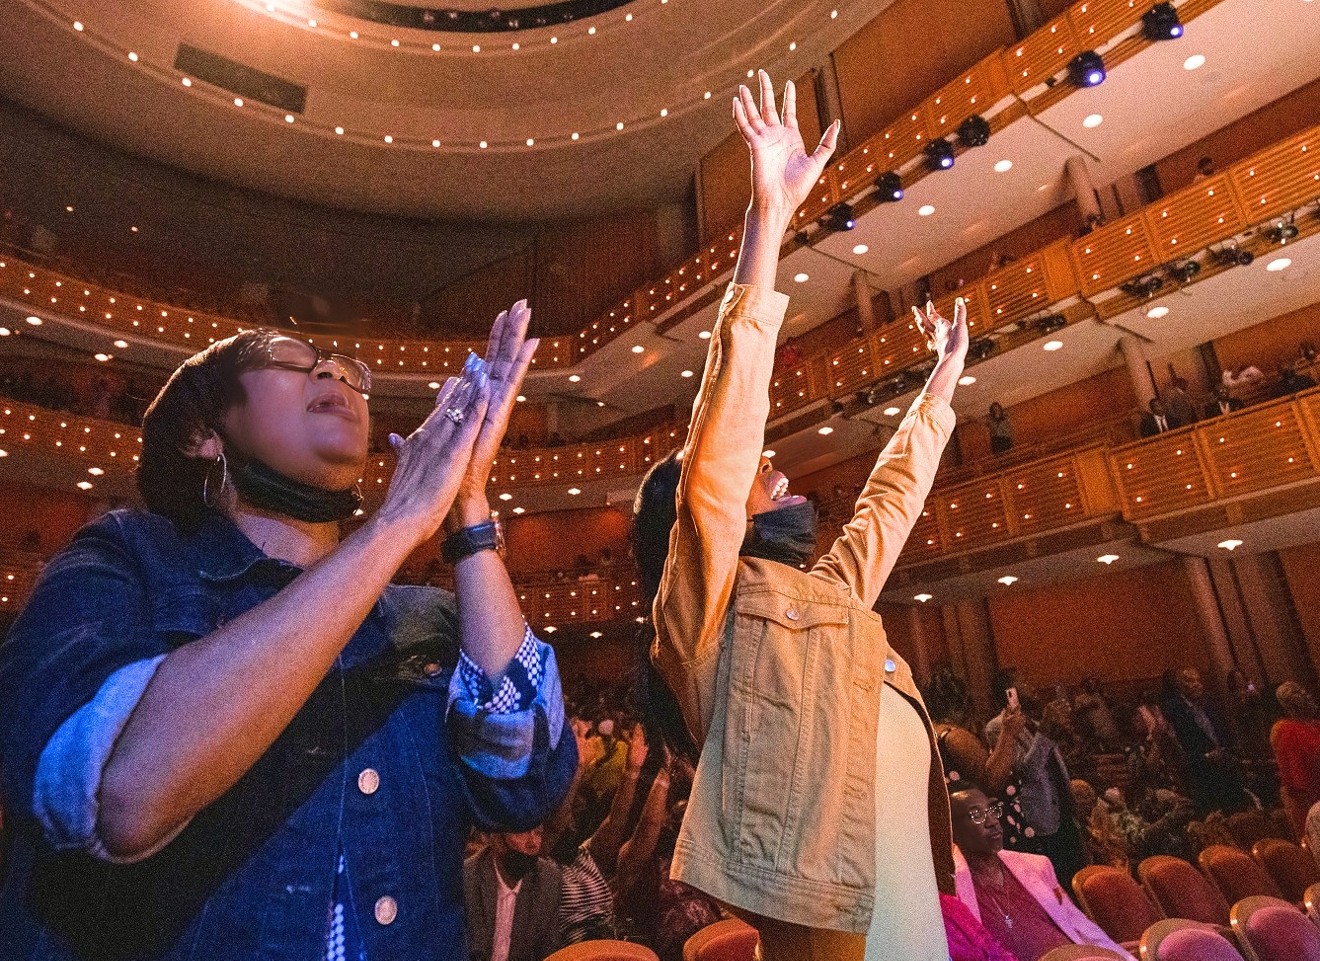 The Adrienne Arsht Center's Free Gospel Sundays kicks off with “Singing in the Streets” on Saturday, October 28, and a show at the Arsht on Sunday, October 29.